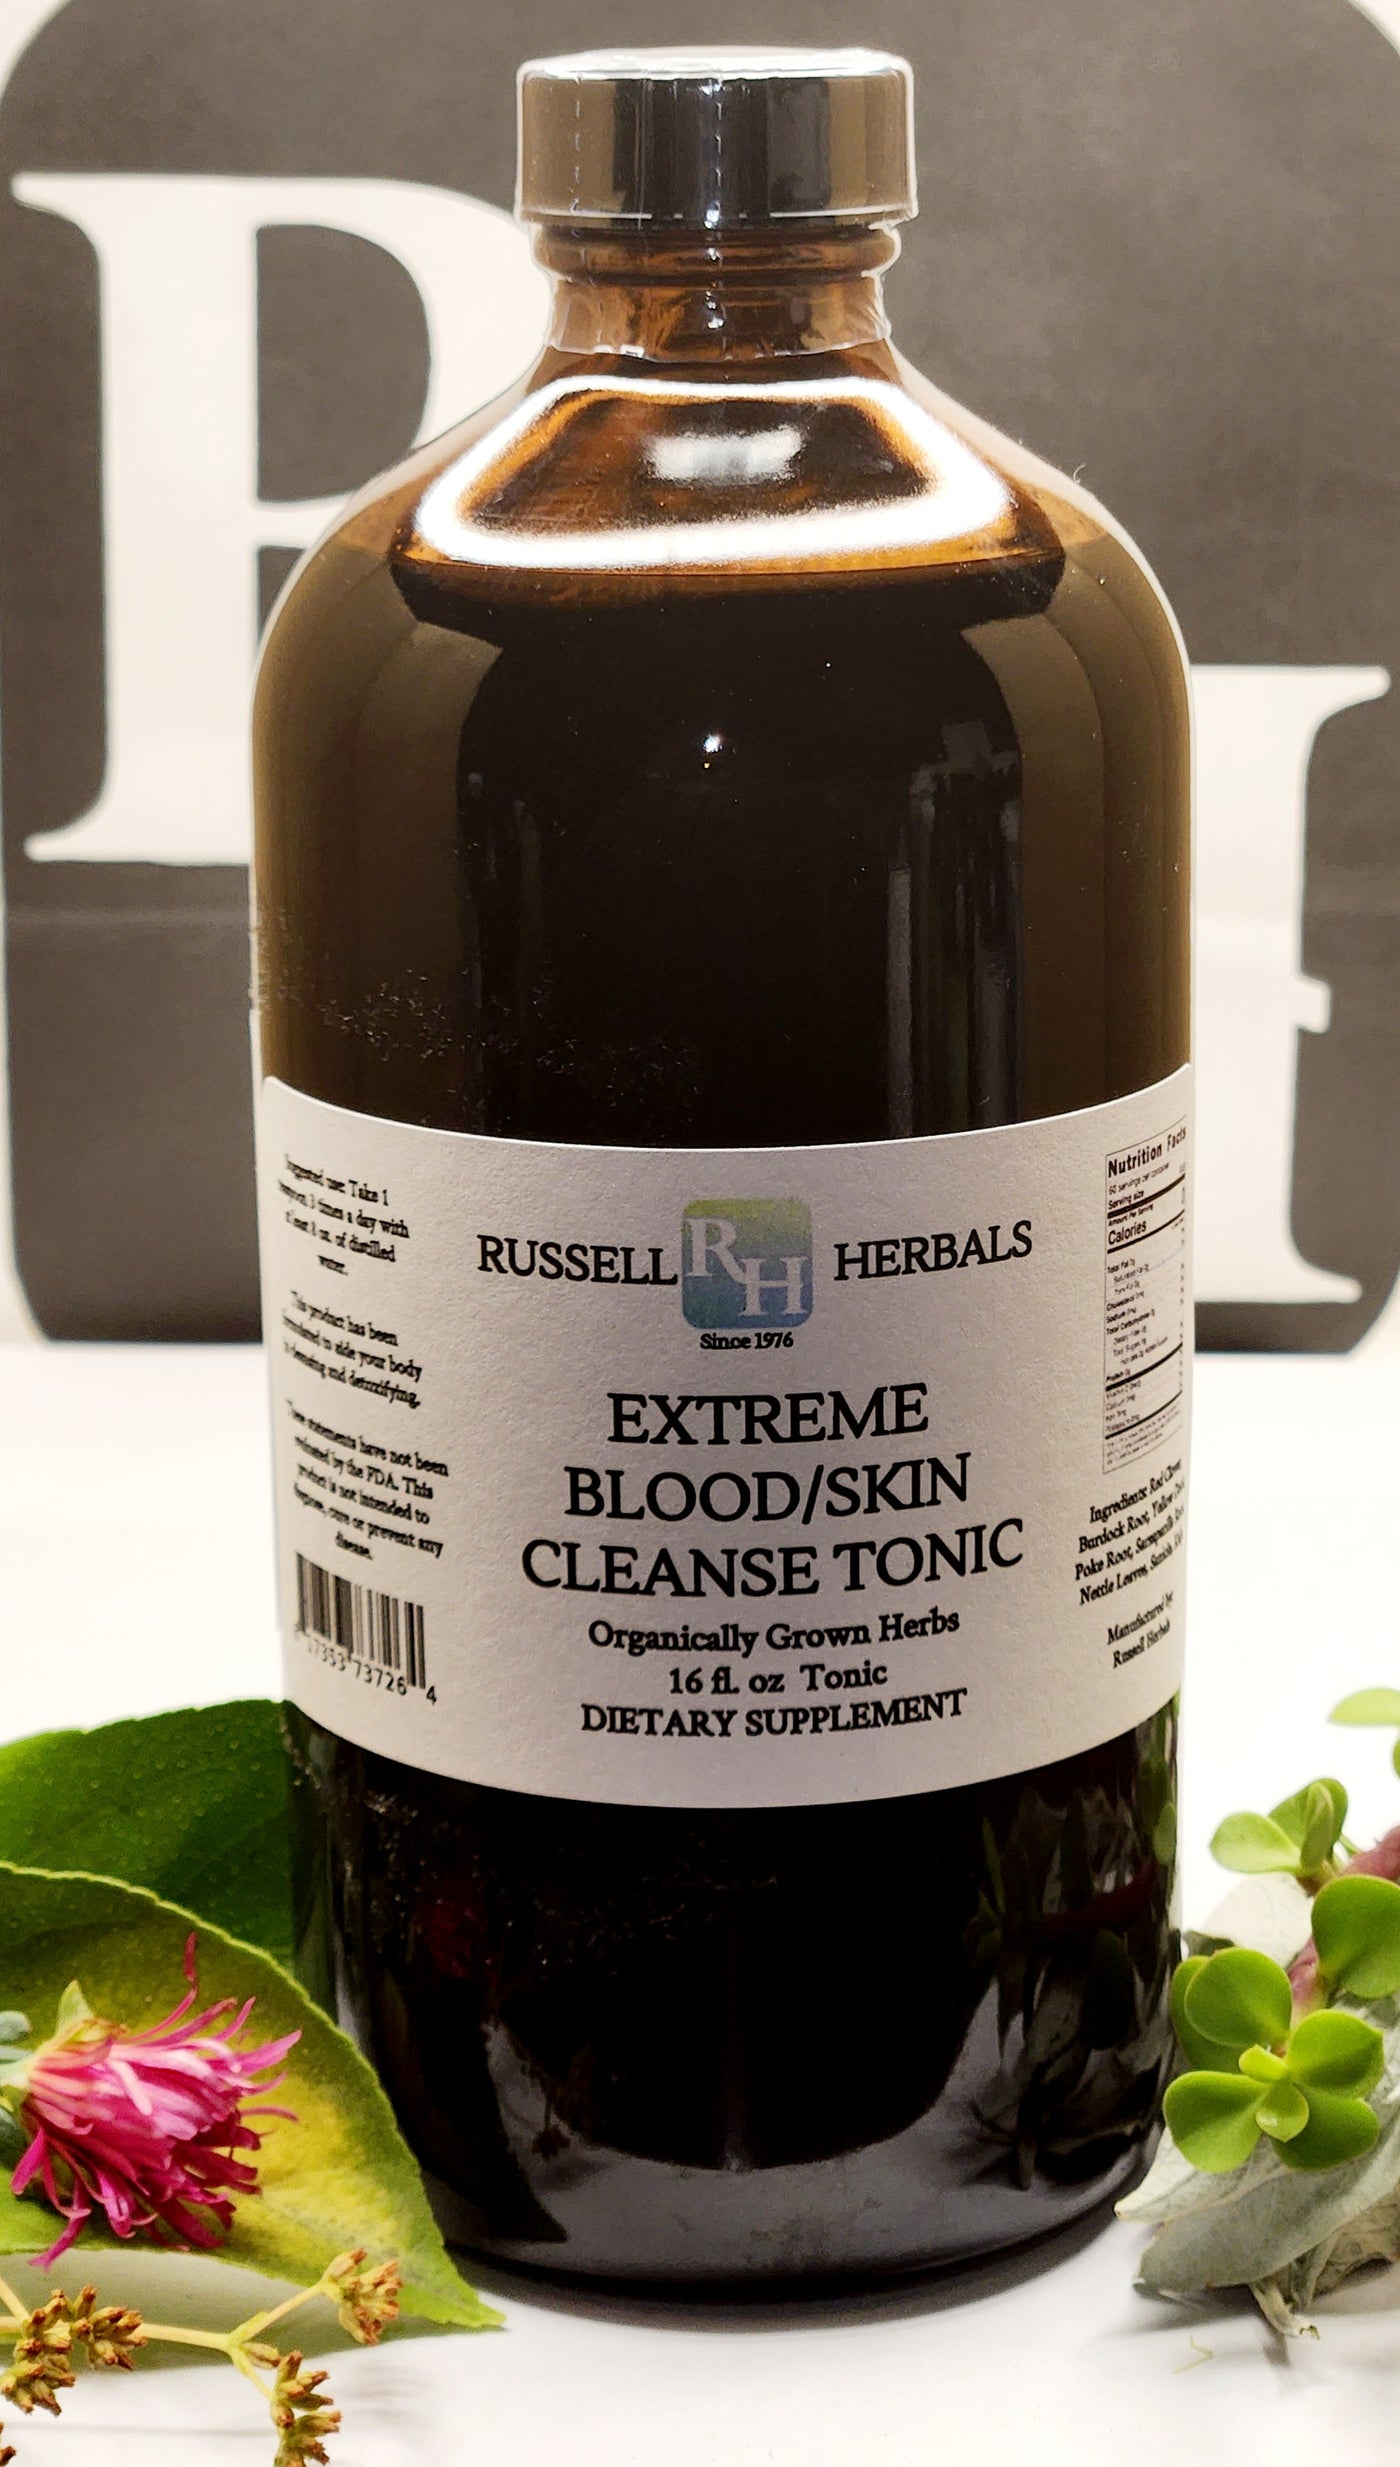 Extreme Blood/Skin Cleanse Tonic